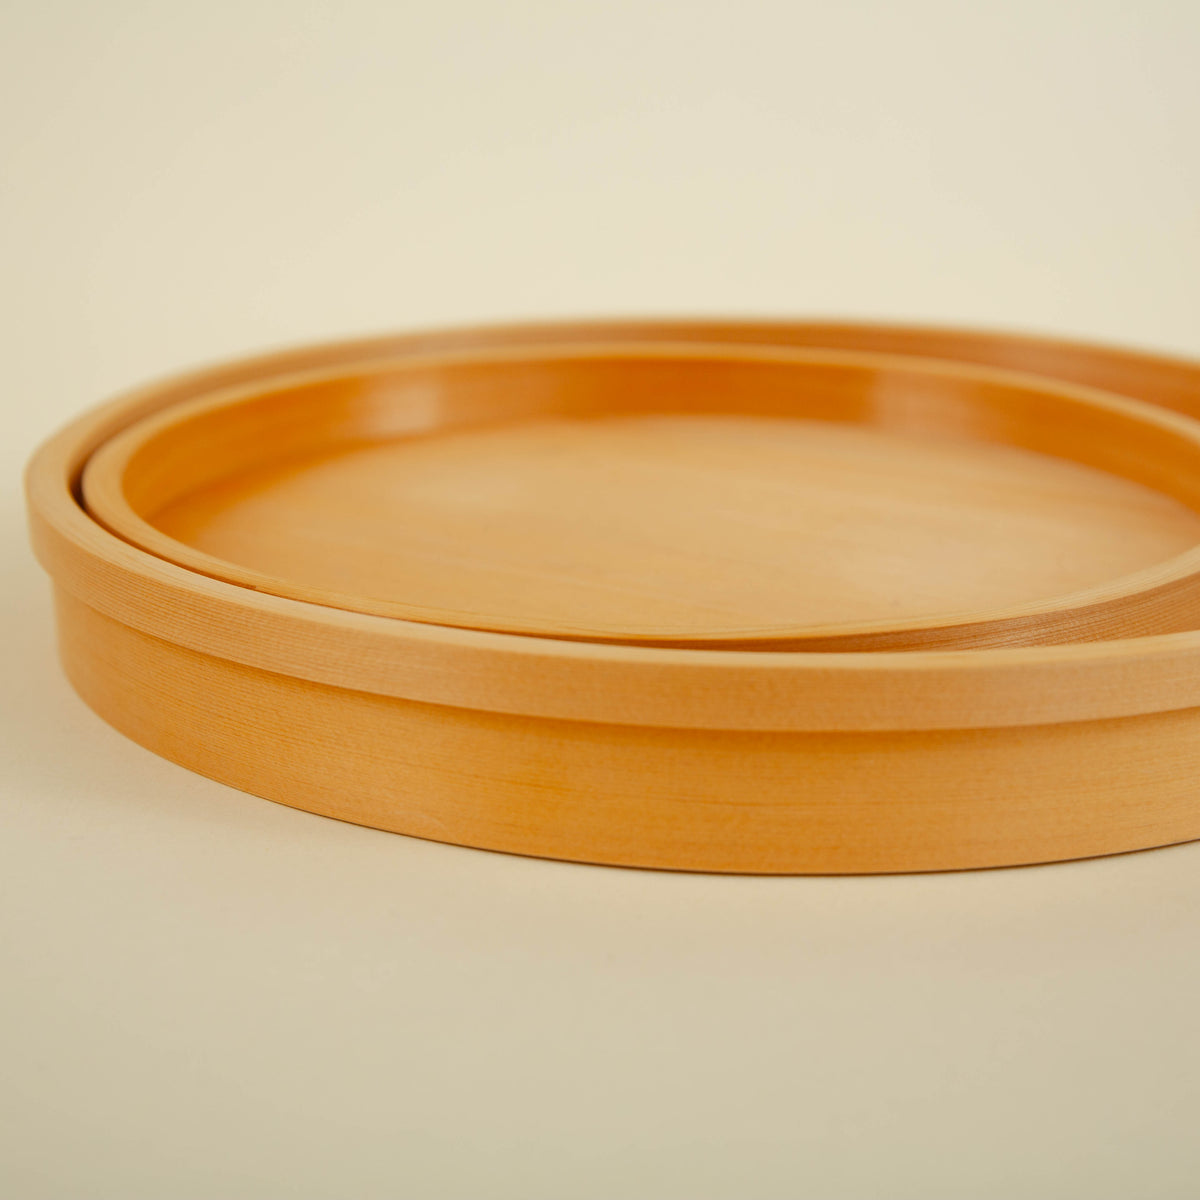 Wood and Porcelain Tableware